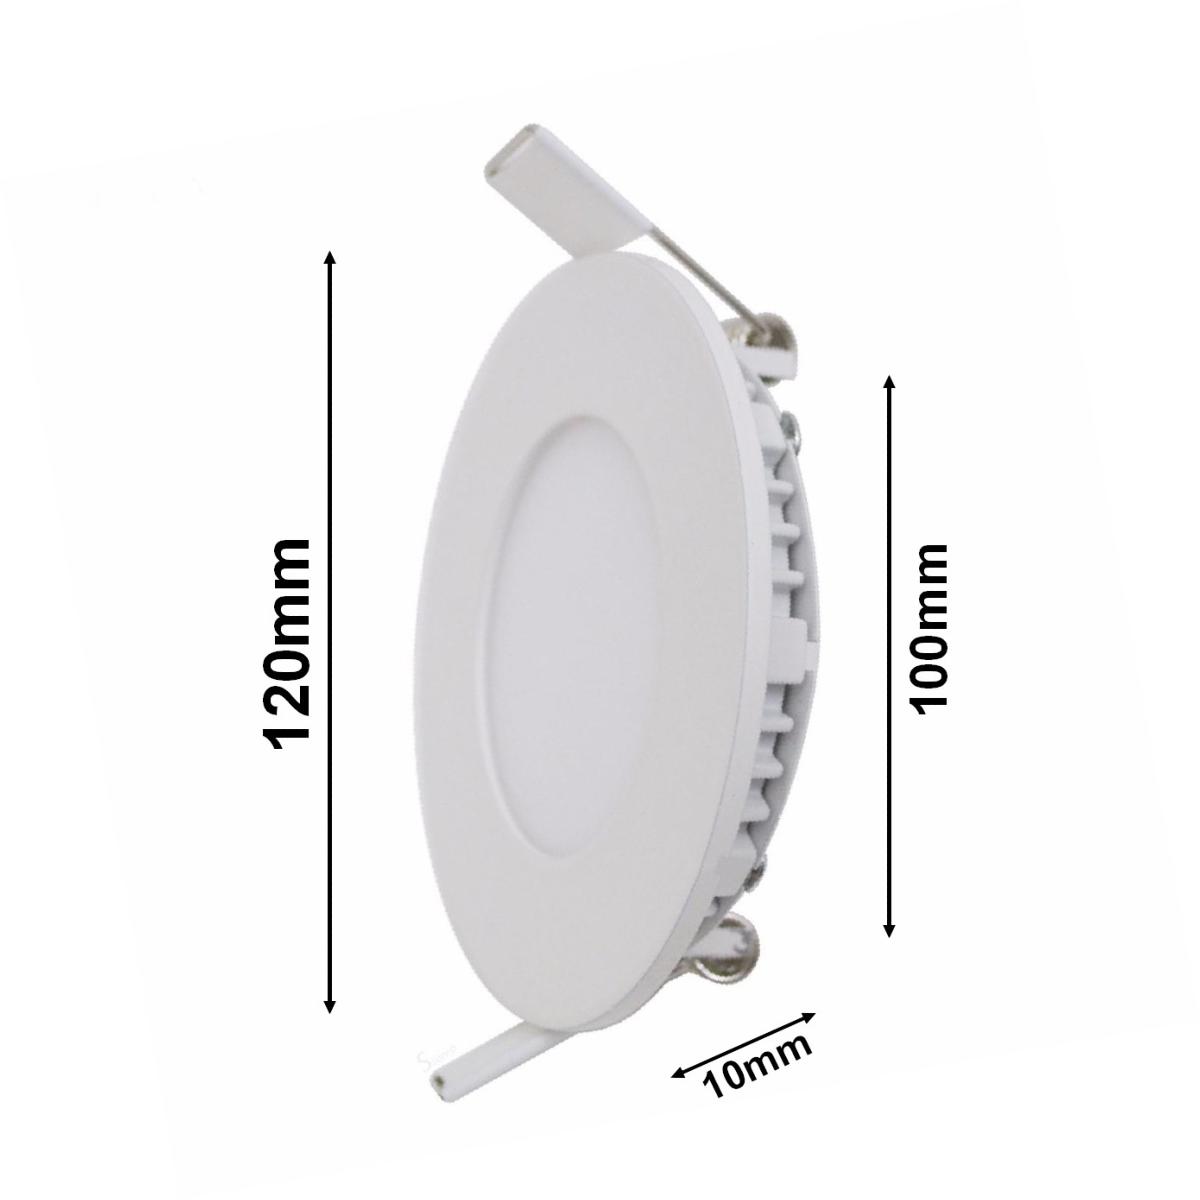 Spot LED Extra Plat Downlight Rond 6W Blanc (Pack de 5) - Silamp France